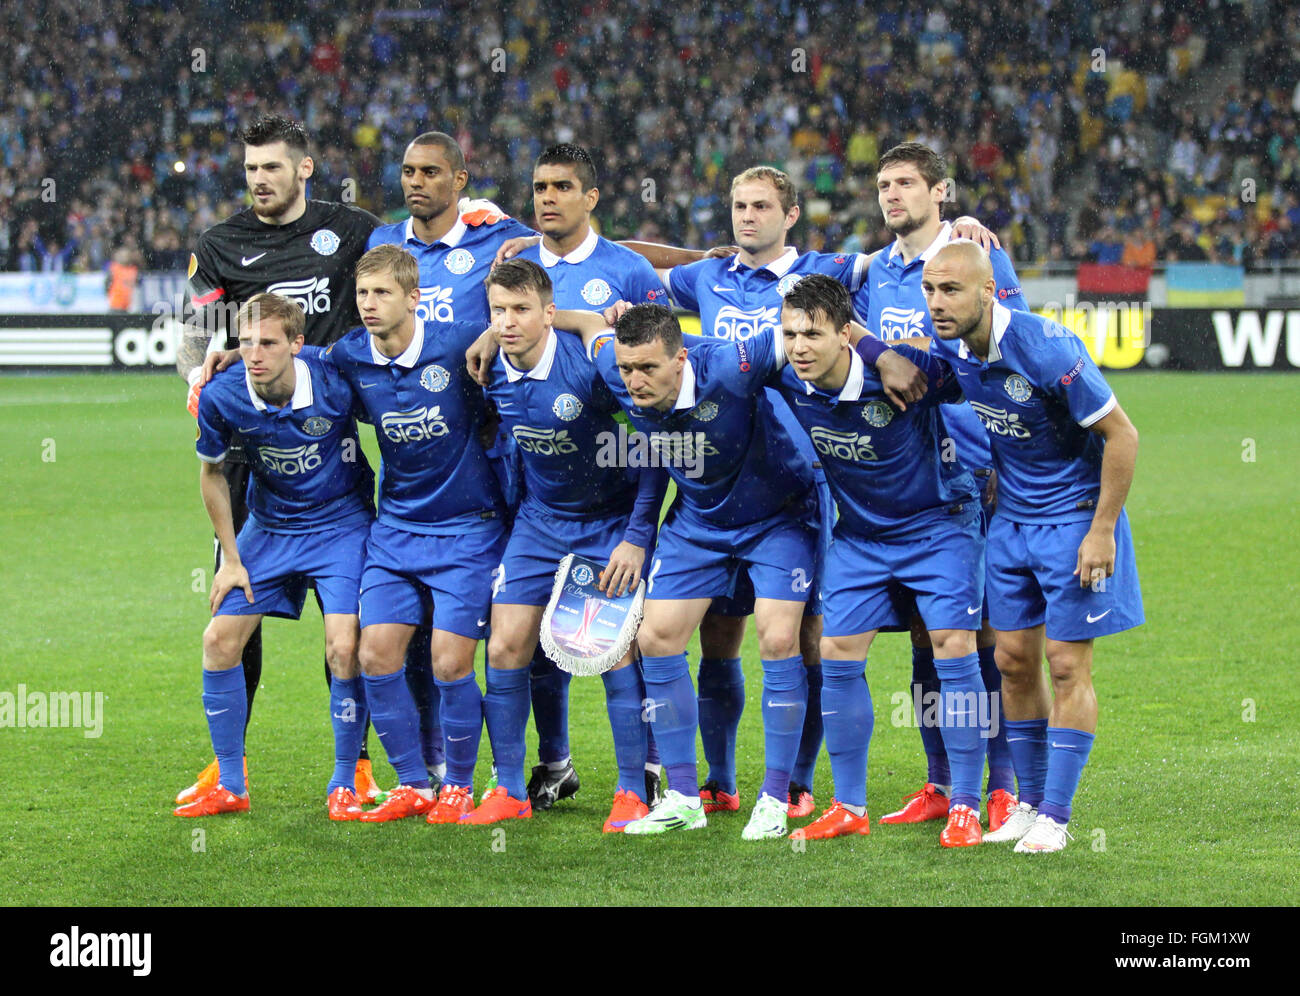 KYIV, UKRAINE - MAY 14, 2015: Players of FC Dnipro team pose for a group photo before UEFA Europa League semifinal game against Stock Photo